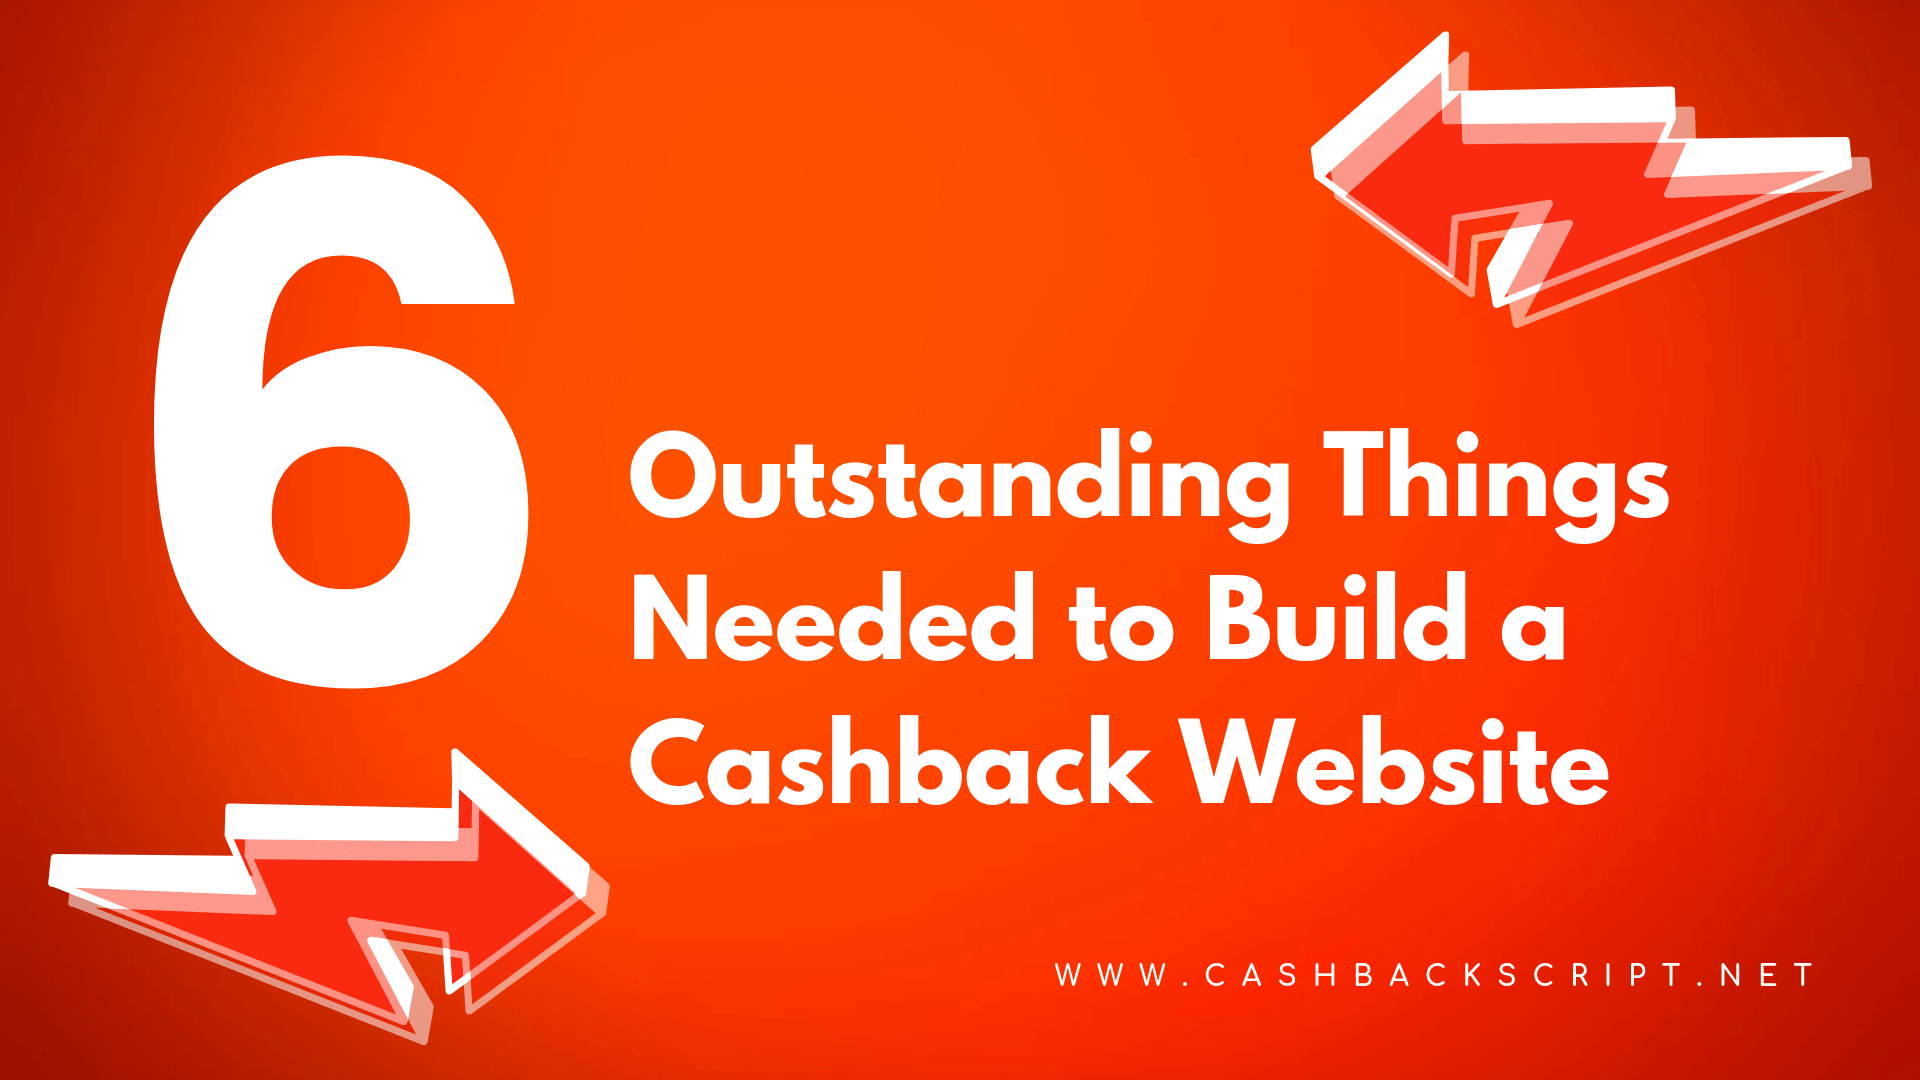 6 Outstanding Things Needed to Build a Cashback Website